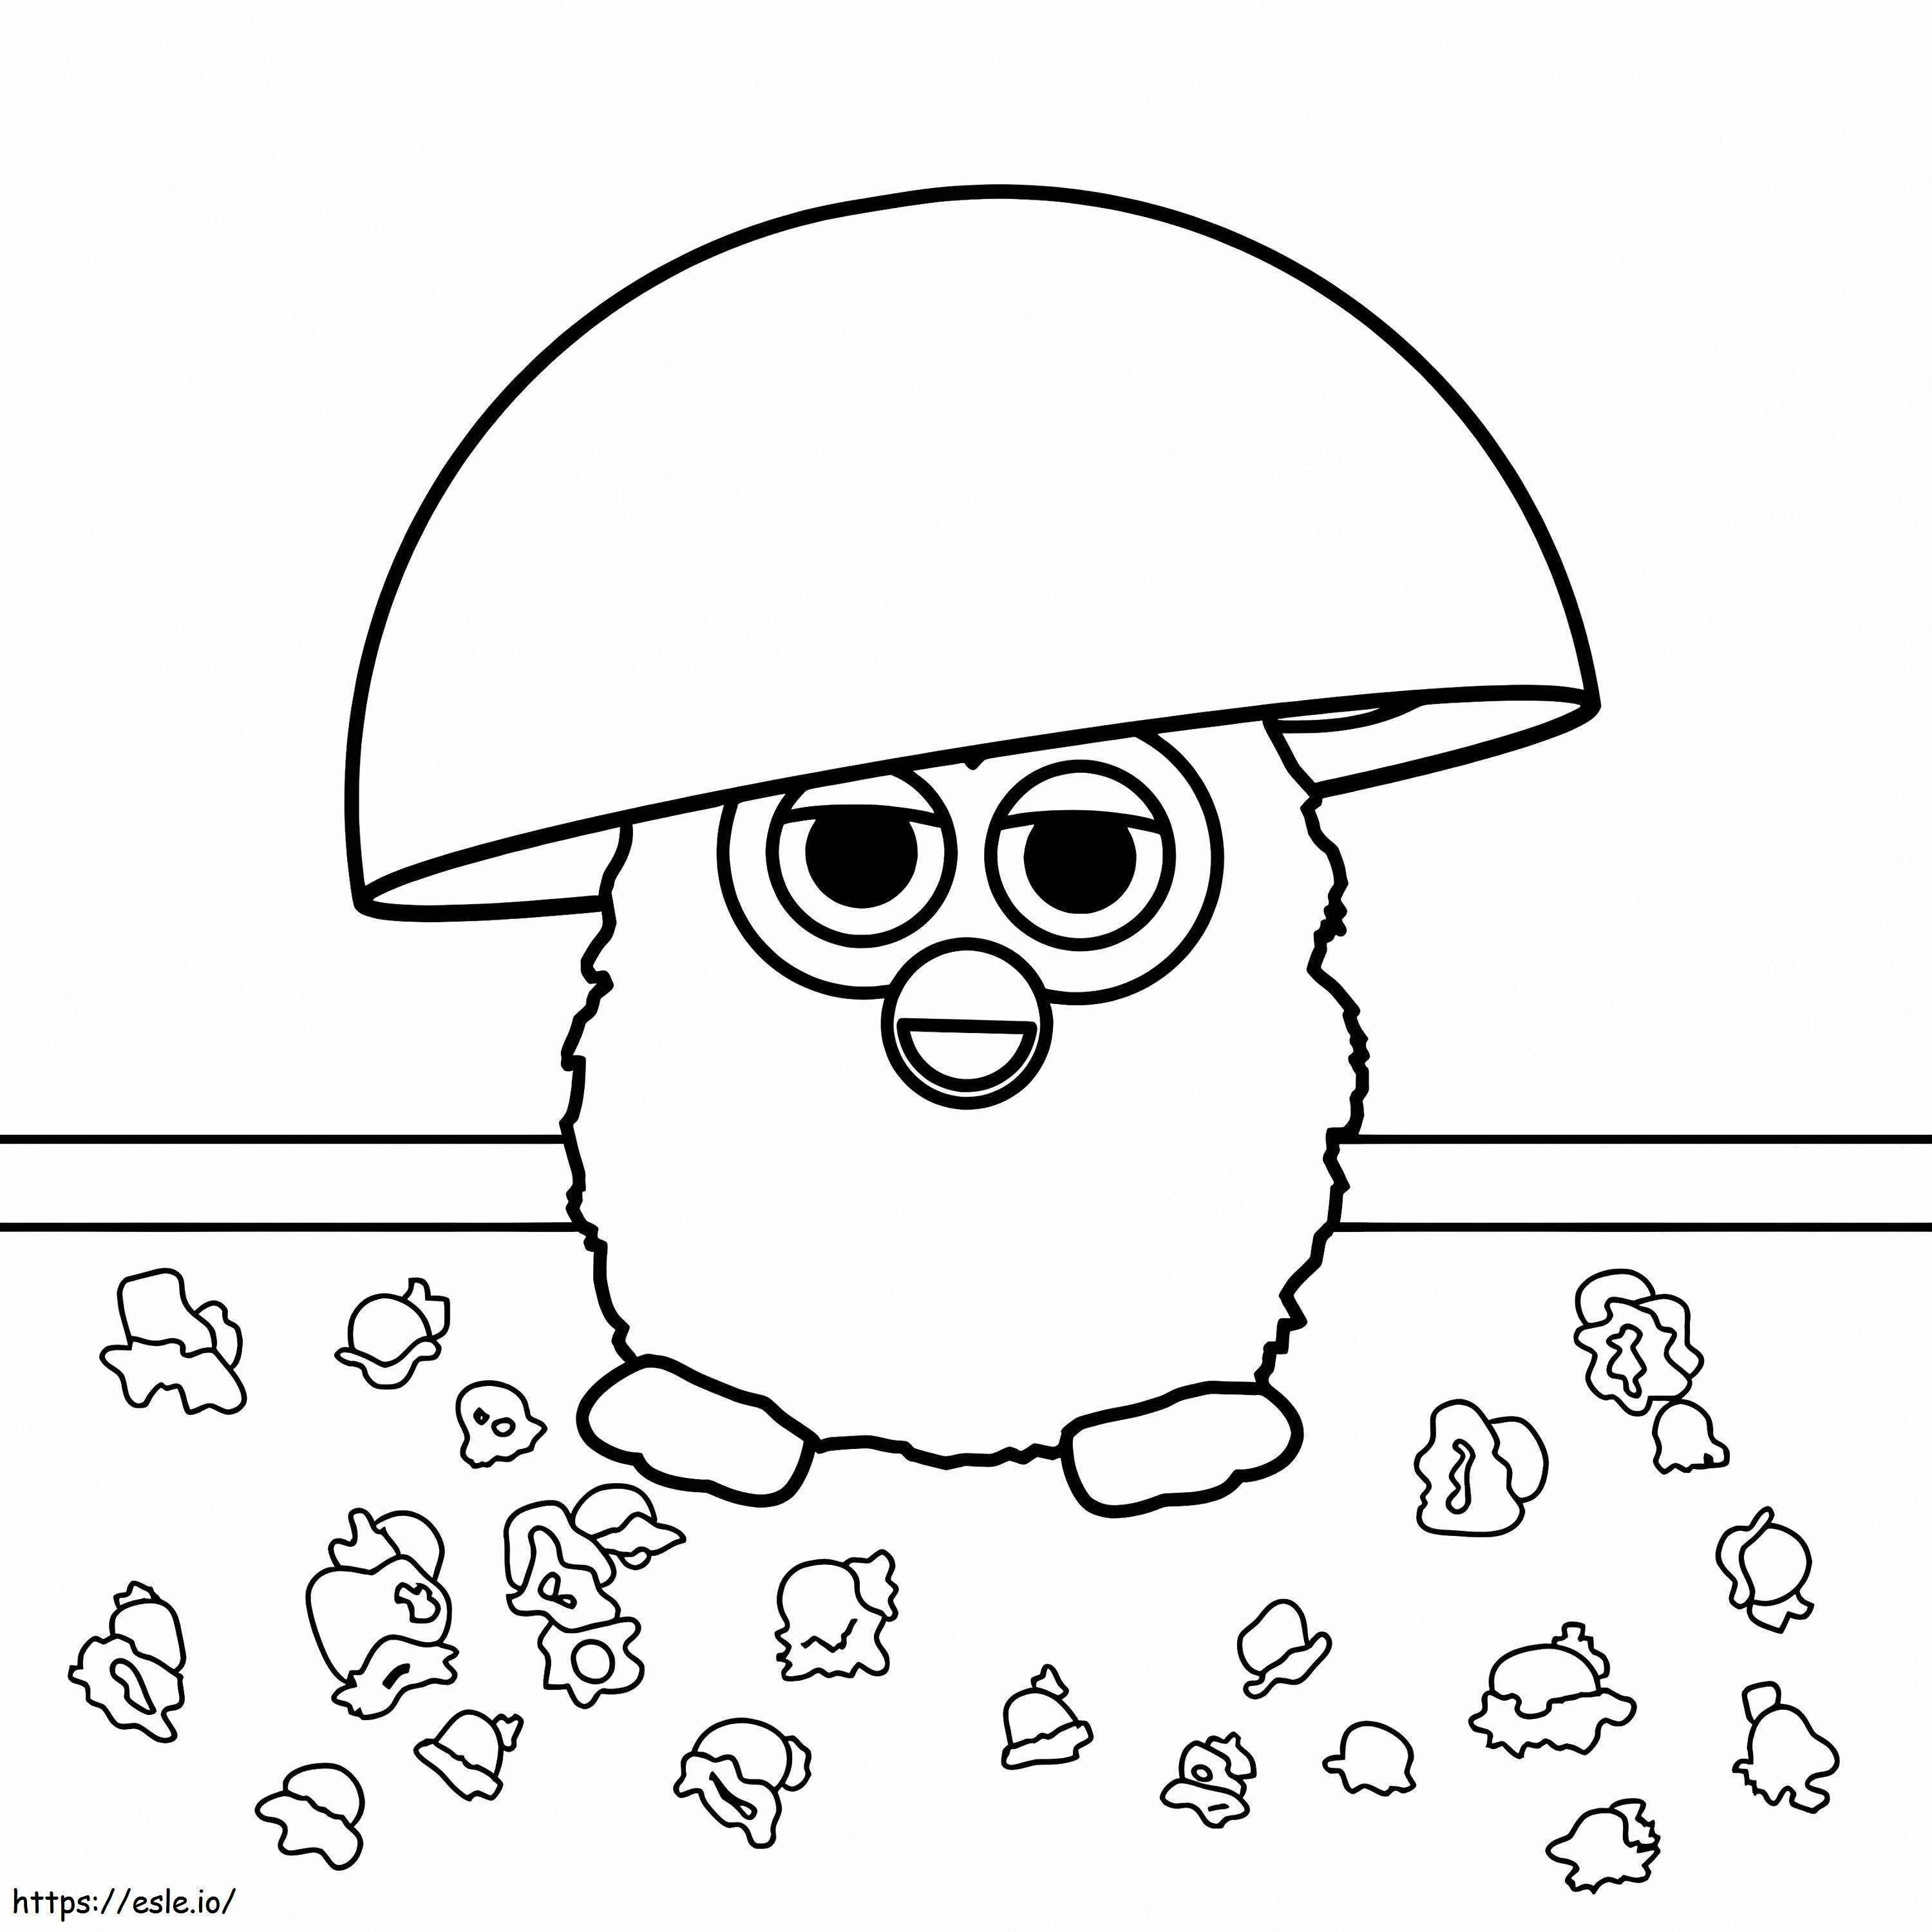 Furby With Popcorn coloring page